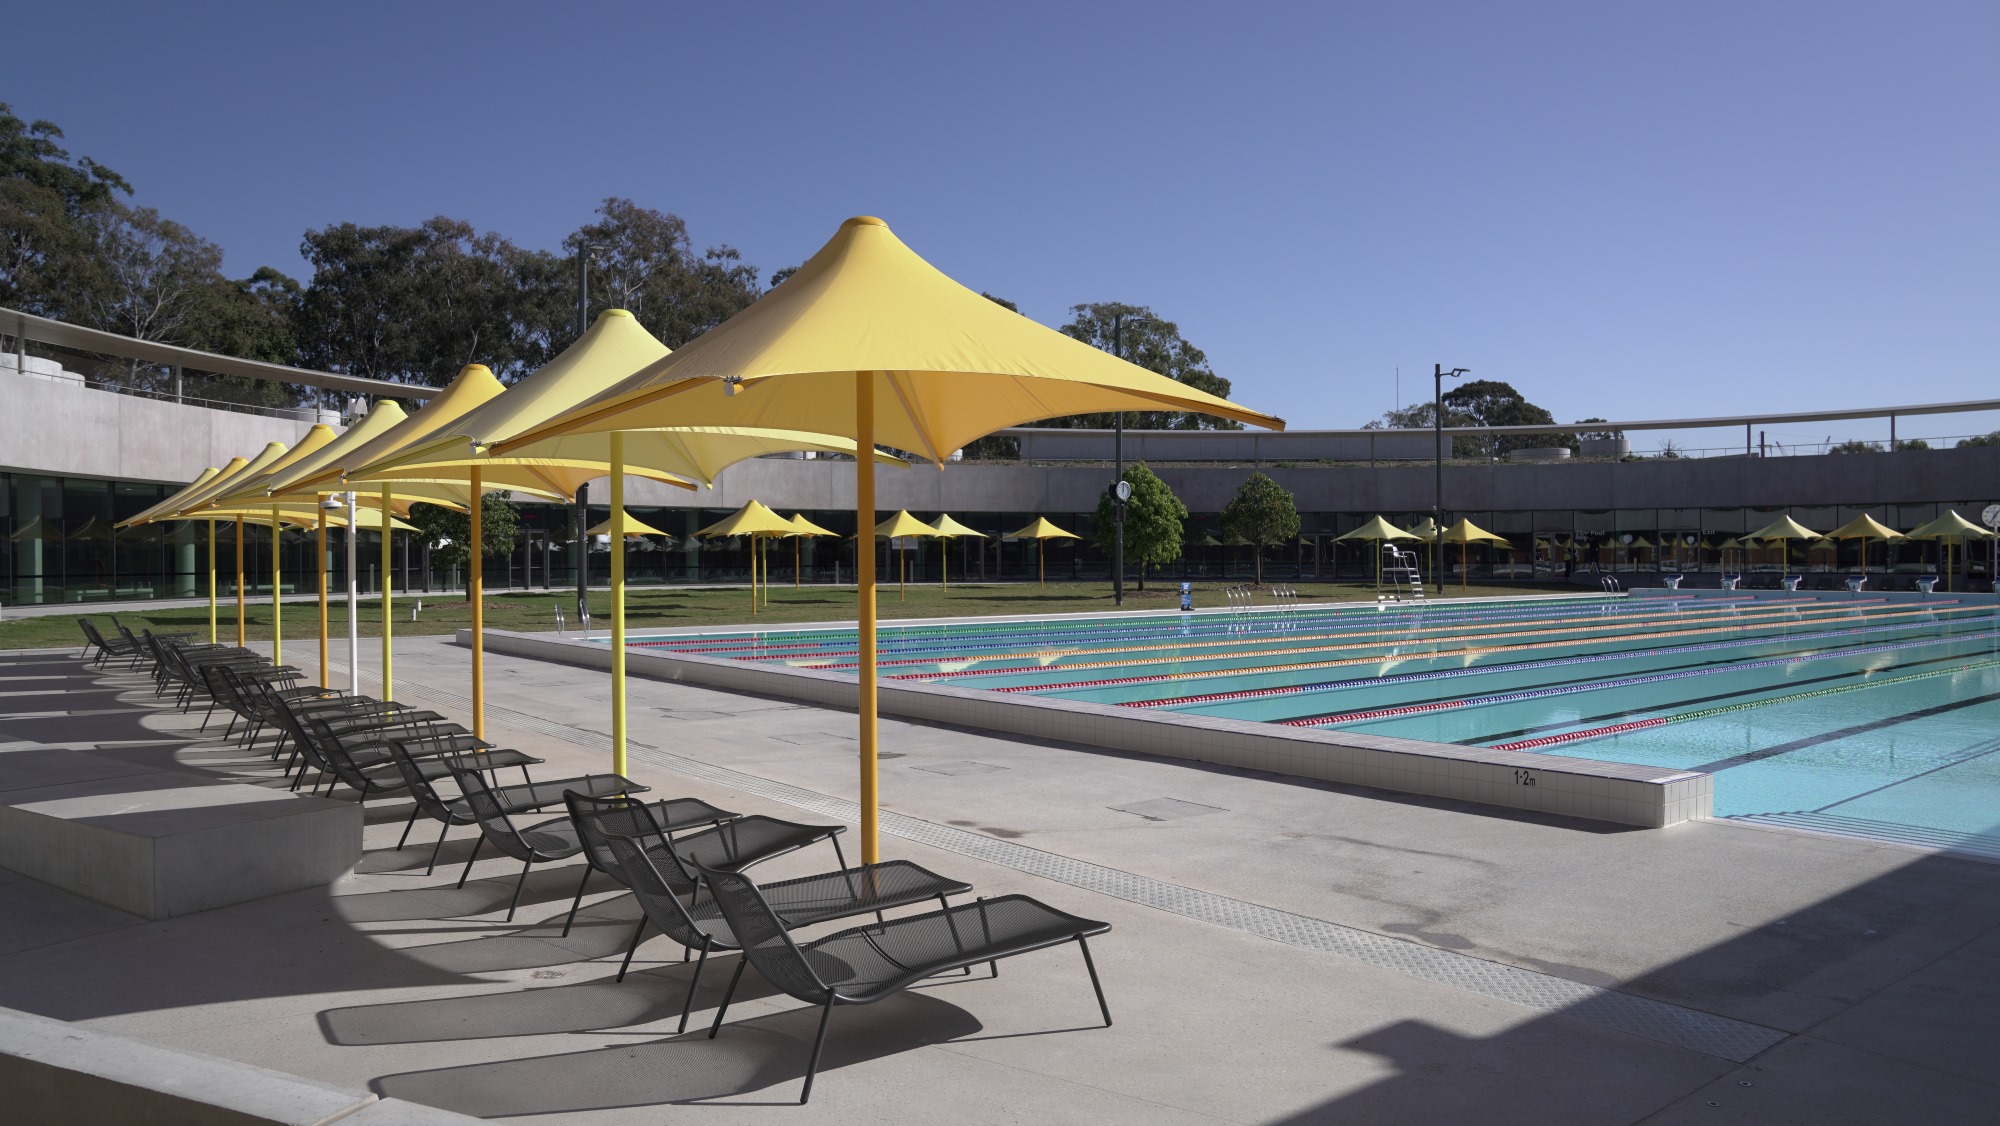 Parramatta Aquatic Centre outdoor pool and lounge chairs